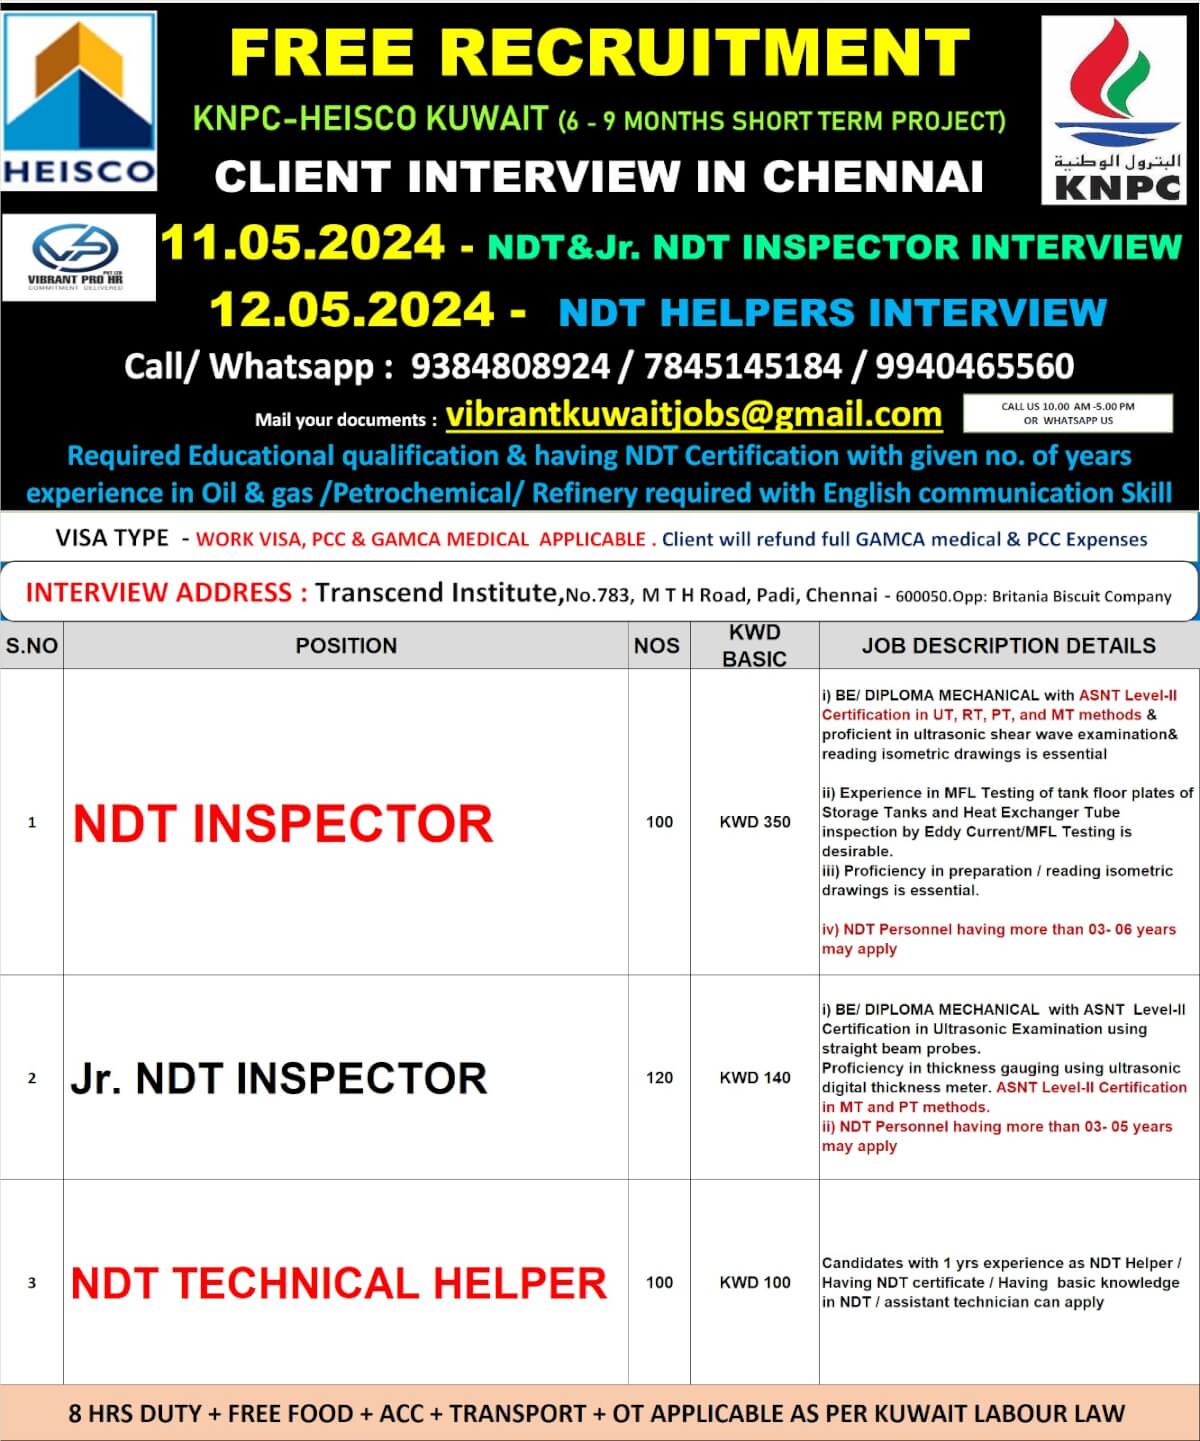 FREE RECRUITMENT -KNPC-HEISCO KUWAIT (6 - 9 MONTHS SHORT TERM PROJECT) CLIENT INTERVIEW IN CHENNAI -11.05.2024 - NDT & Jr. NDT INSPECTOR INTERVIEW & 12.05.2024 -  NDT HELPERS INTERVIEW